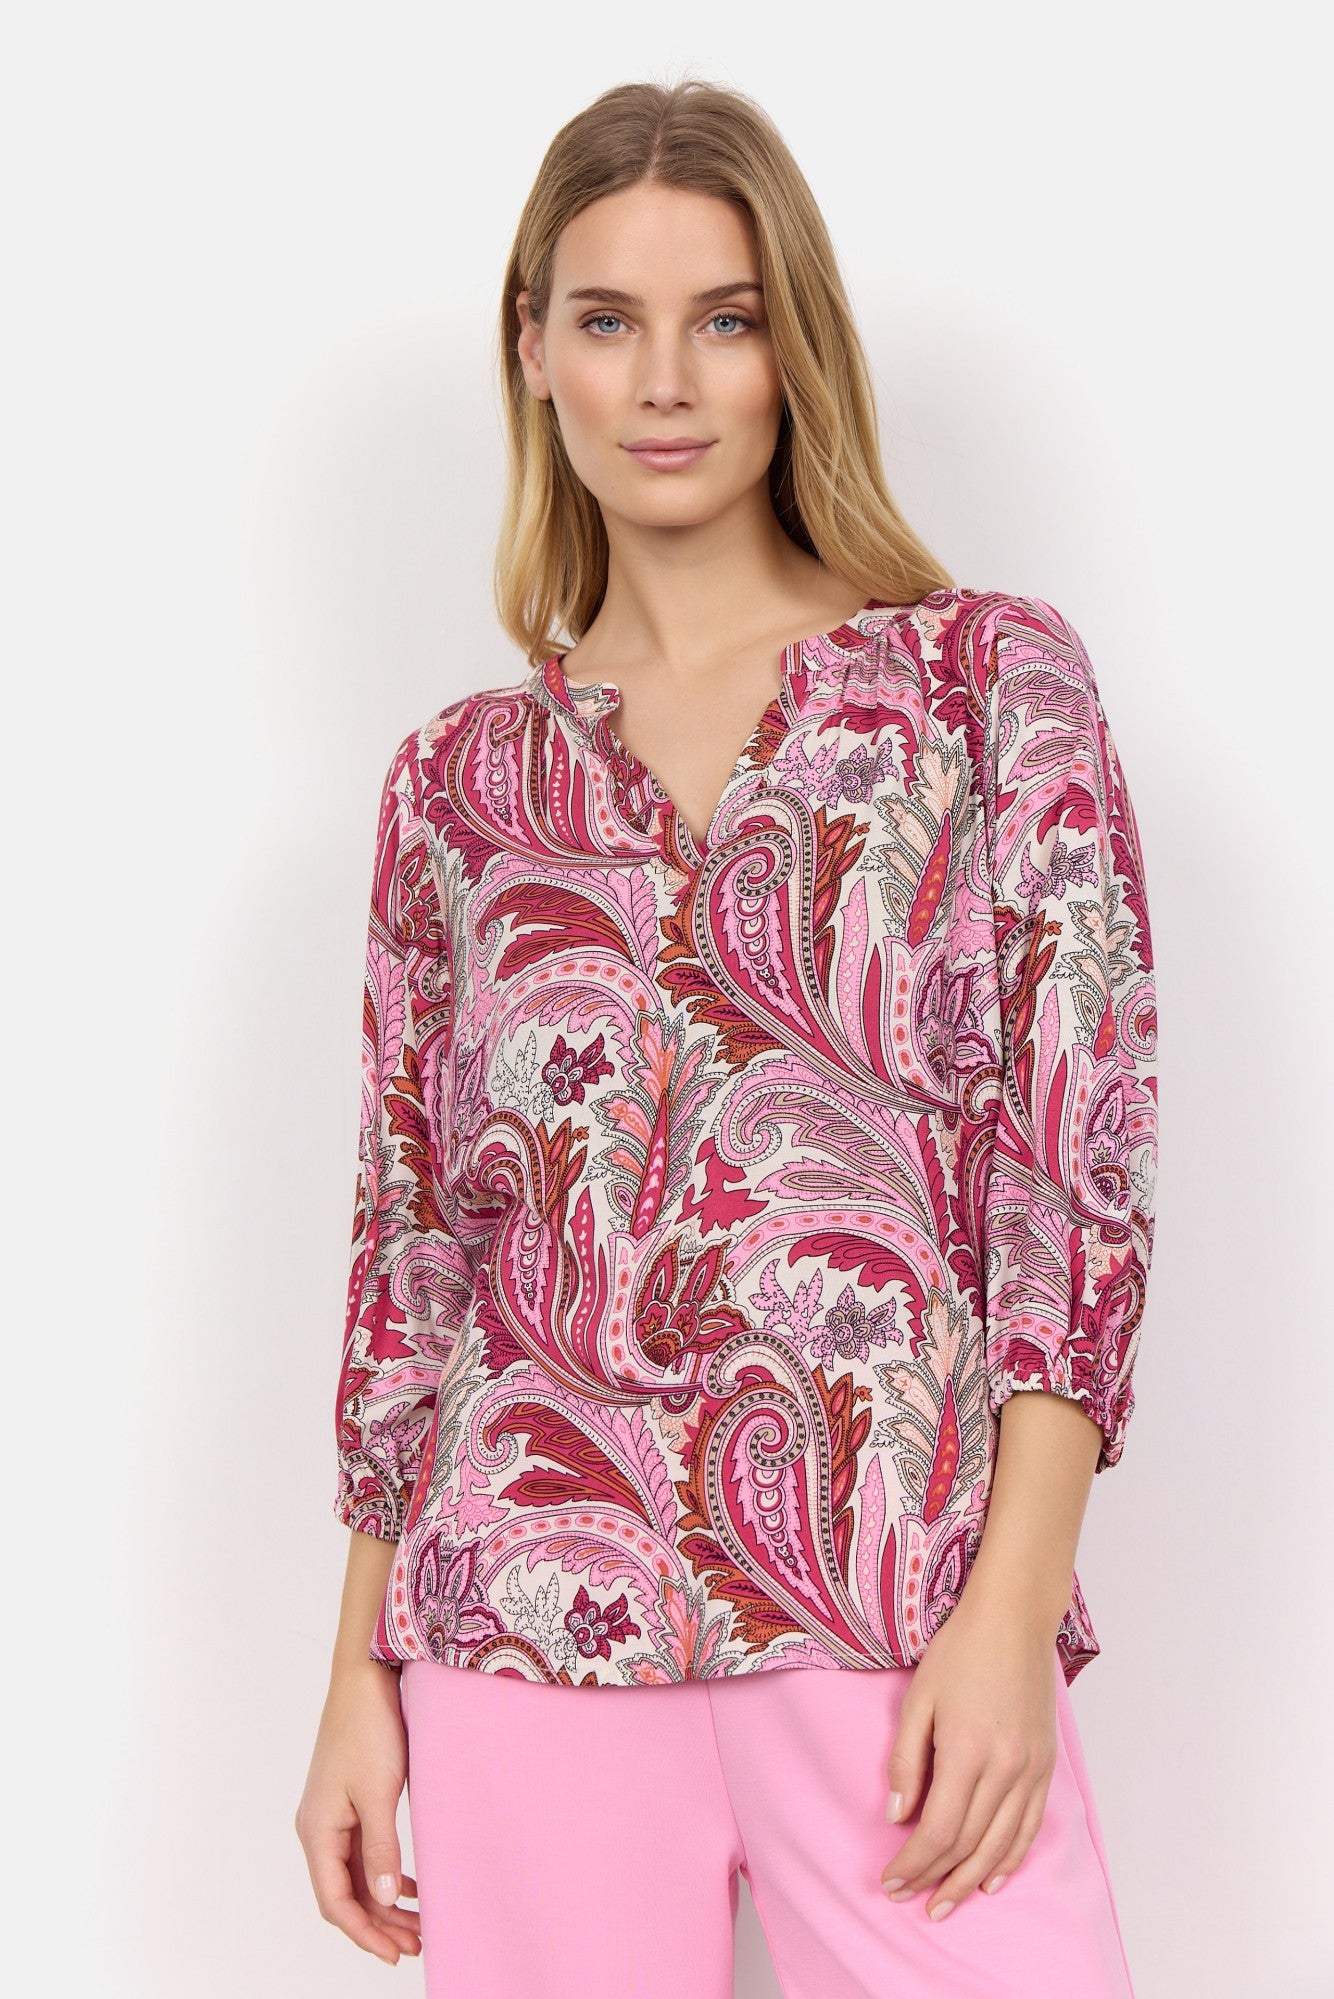 Soya Concept Paisley Blouse Pink